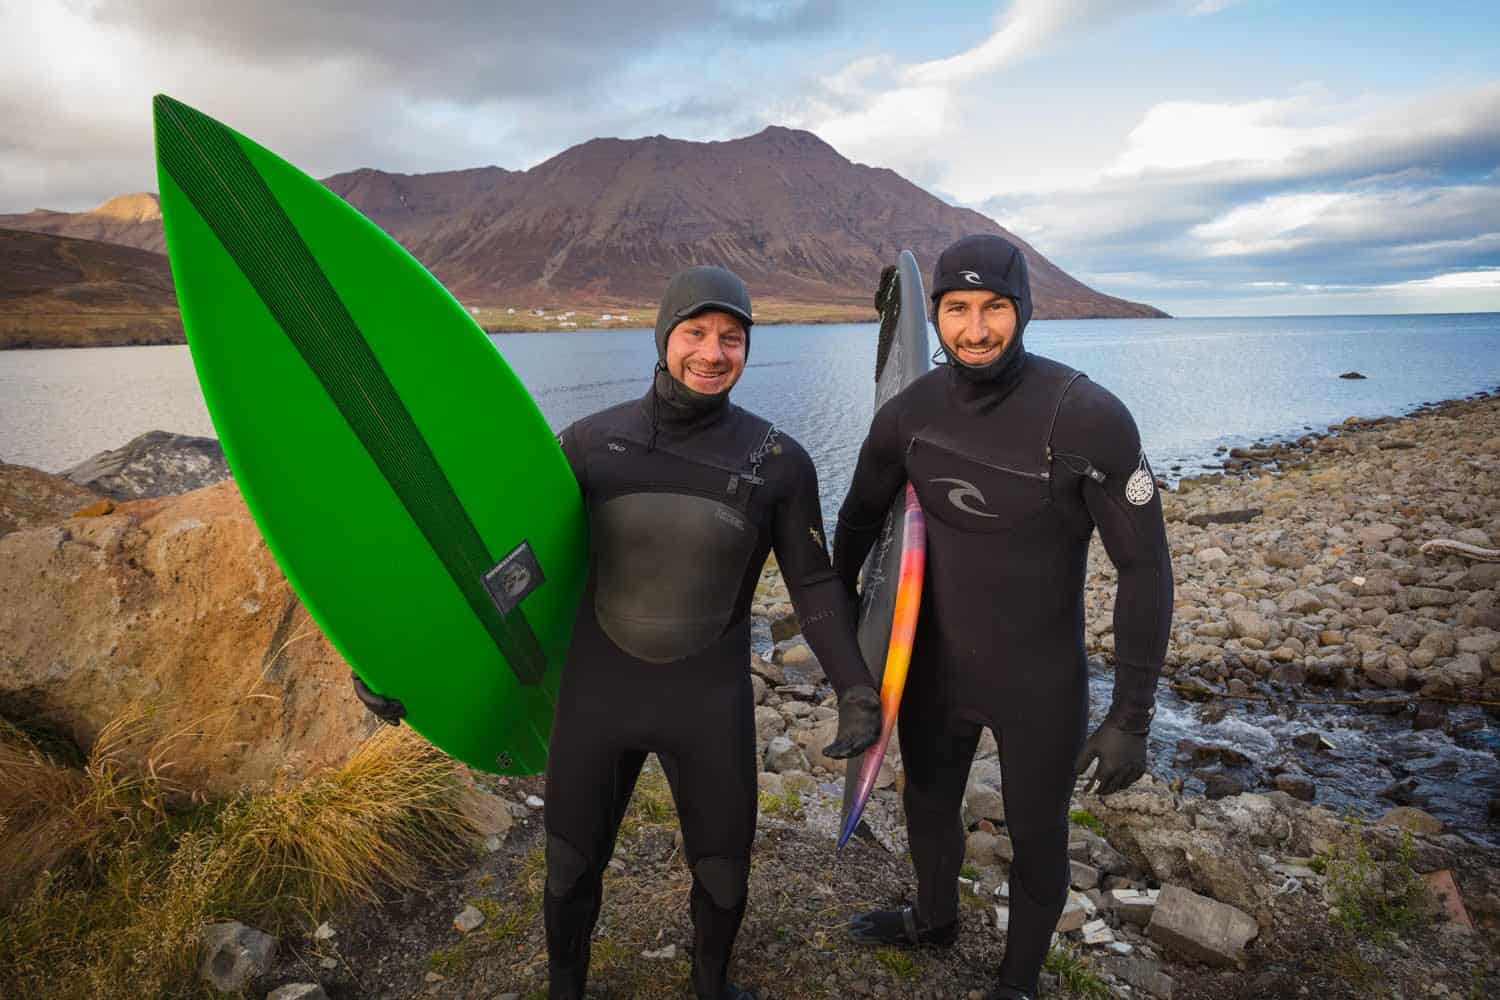 California surfers in Iceland